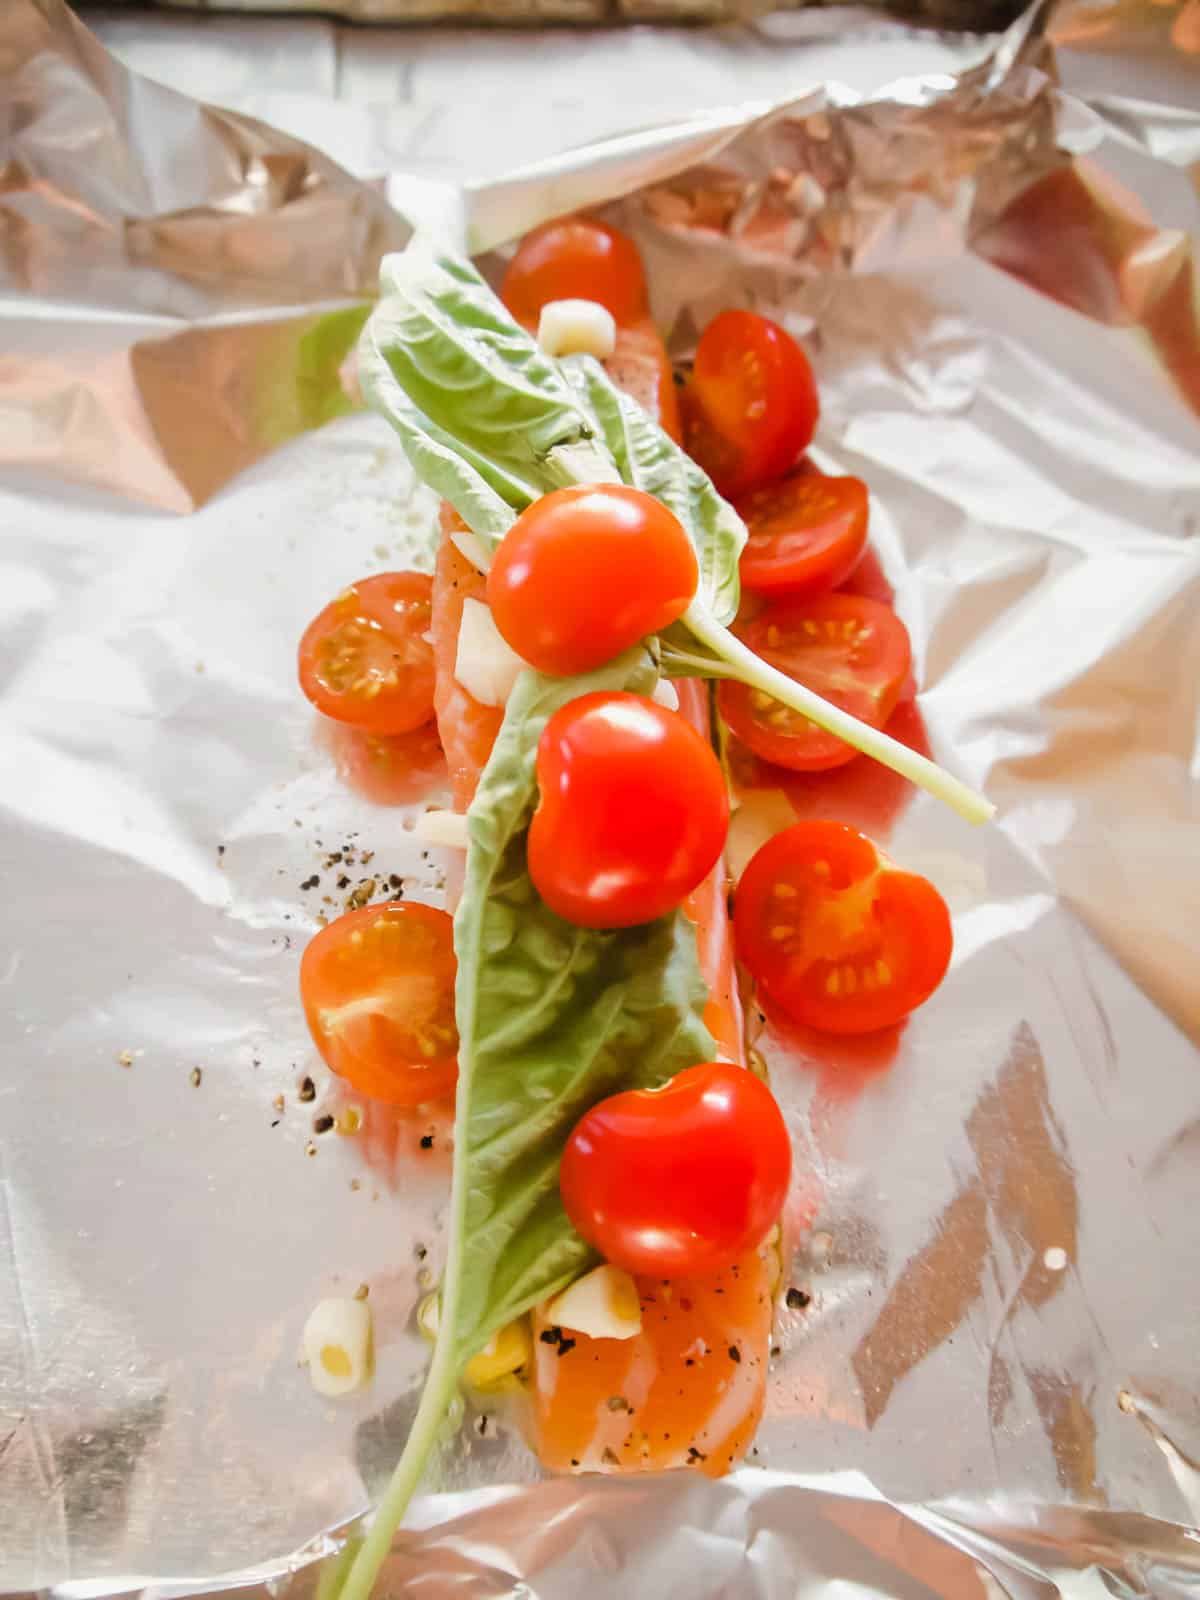 Salmon with garlic, basil, and cherry tomatoes on top.